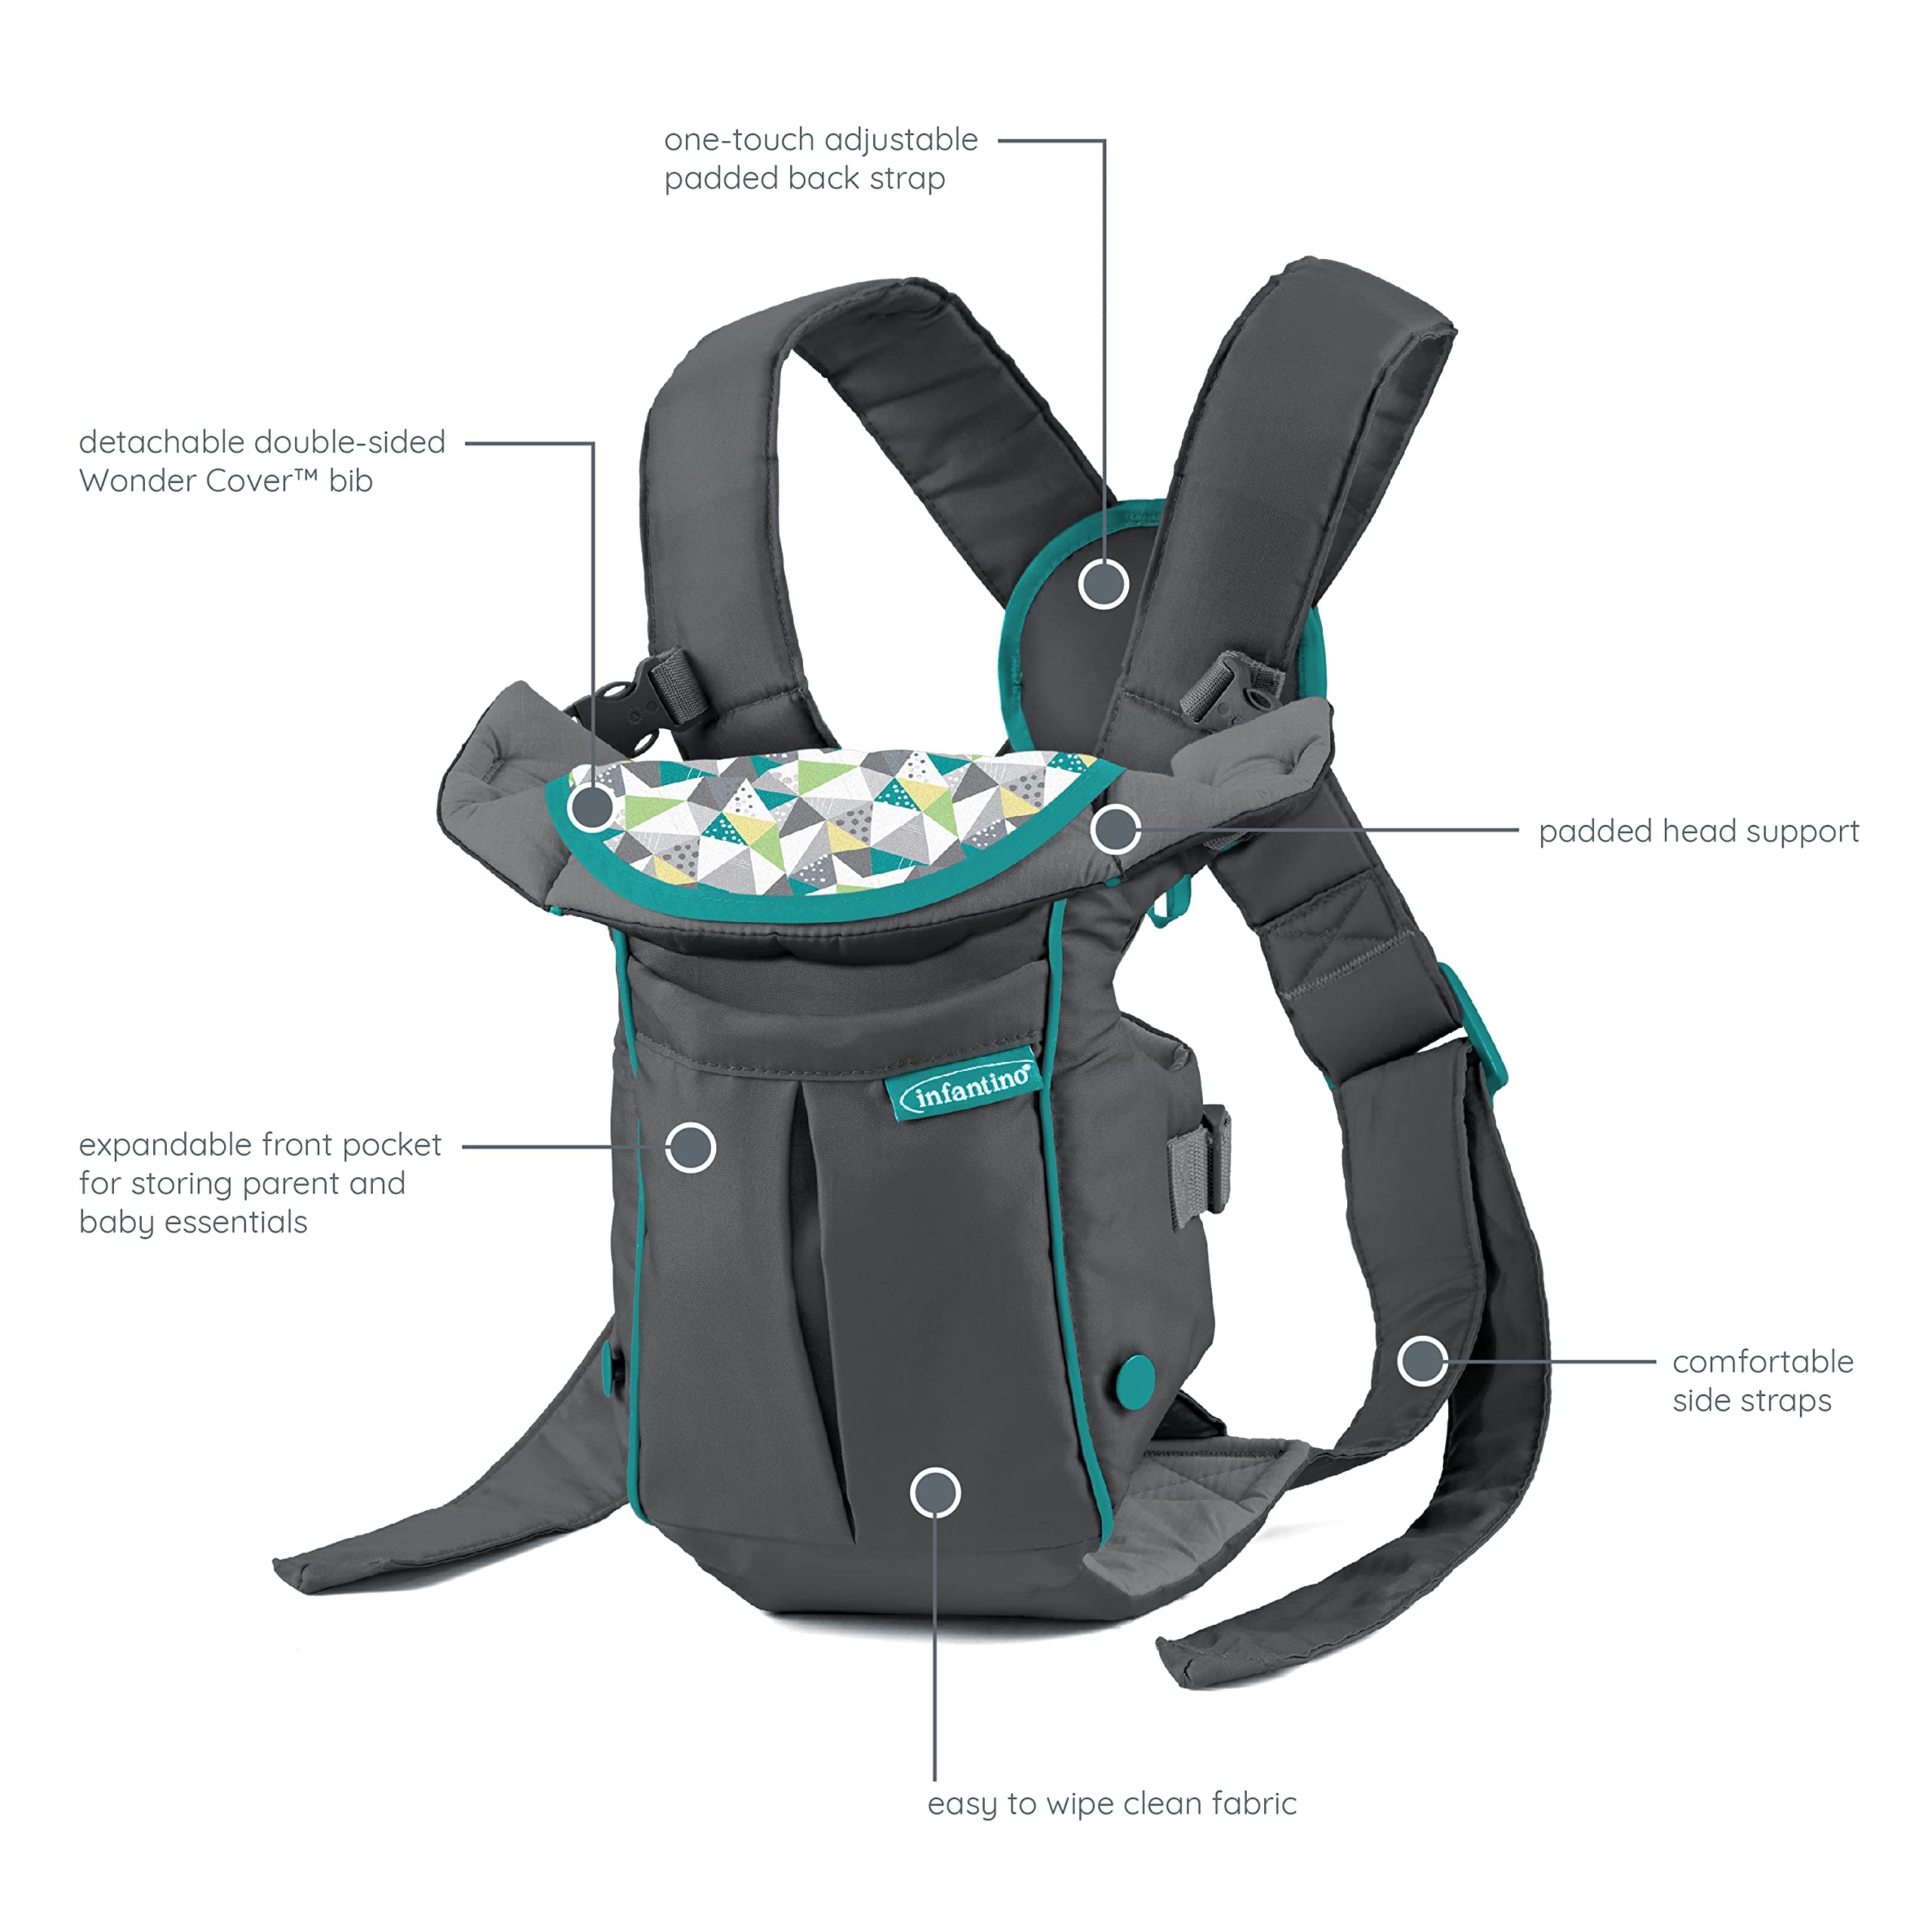 Infantino Swift Classic Carrier with Pocket - 2 Ways to Carry Grey Carrier with Wonder Bib & Essentials Storage Front Pocket, Adjustable Back Strap, Inward & Outward Facing, Easy to Clean Material